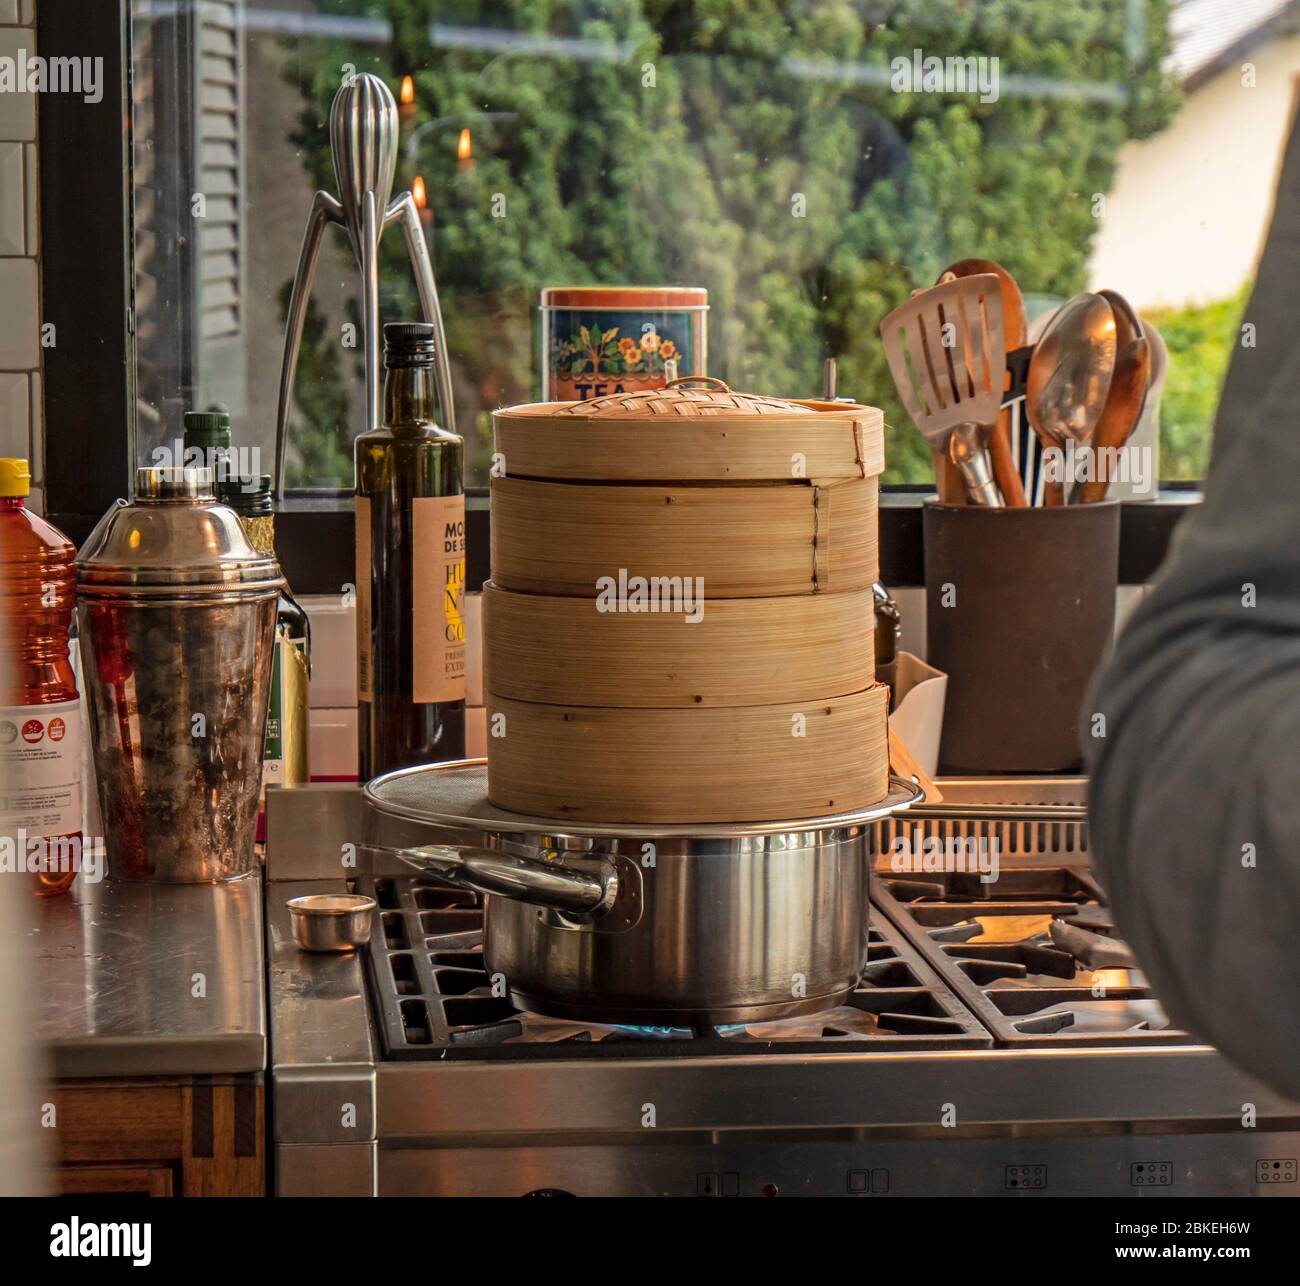 https://c8.alamy.com/comp/2BKEH6W/close-up-shot-of-a-japanese-cooking-steamer-the-steamer-stands-on-top-of-boiling-water-cooking-food-in-a-rustic-beautiful-kitchen-2BKEH6W.jpg